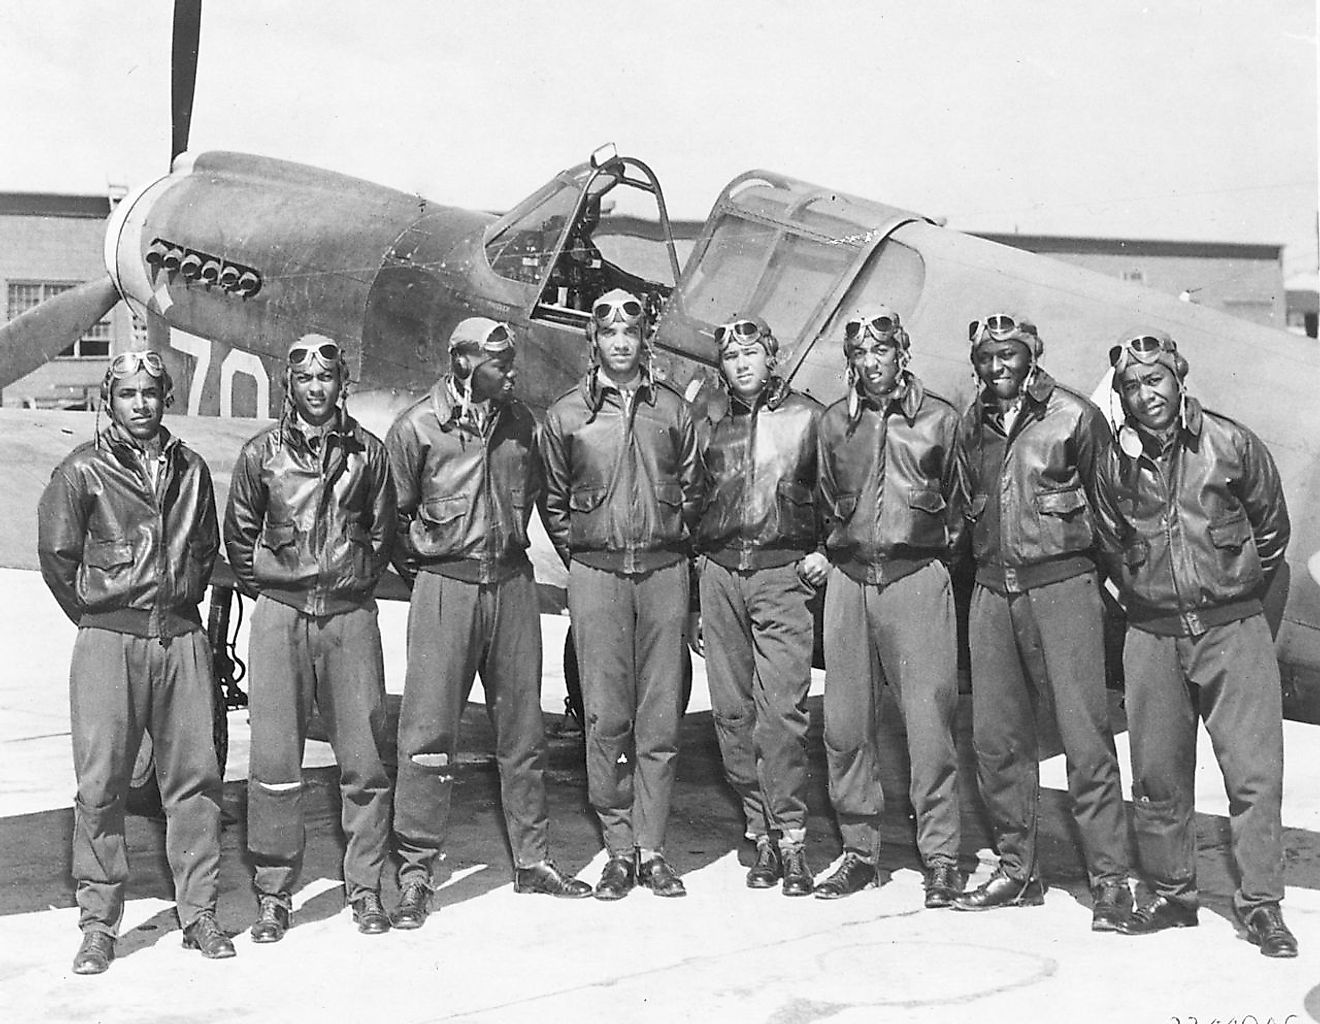 More details Eight Tuskegee Airmen in front of a P-40 fighter aircraft. Image credit: